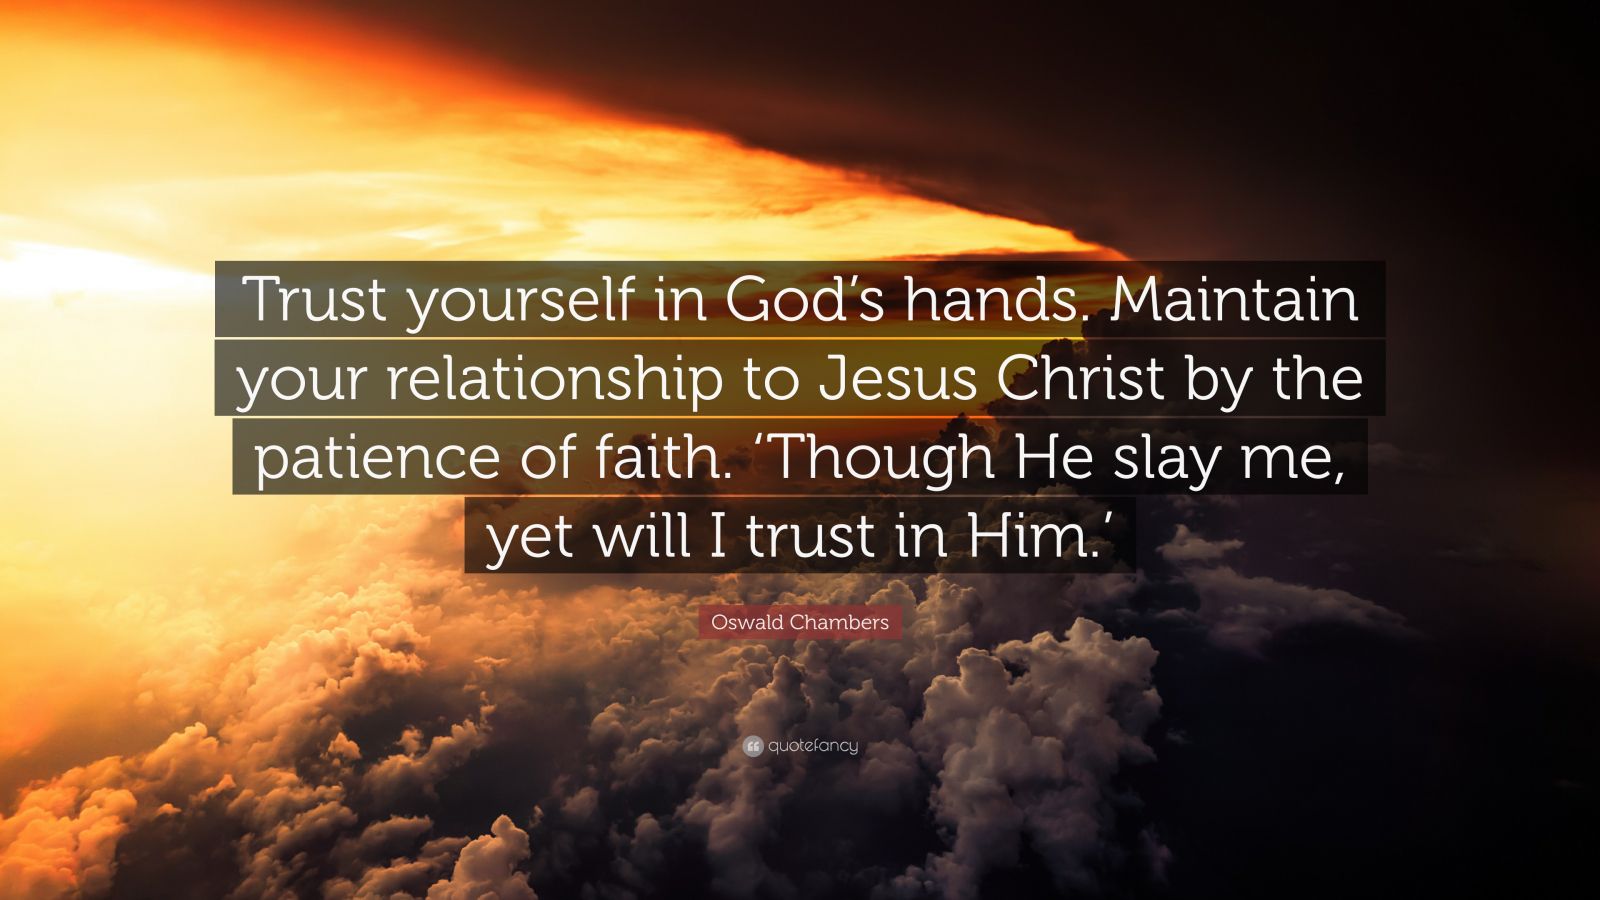 Oswald Chambers Quote: “Trust yourself in God’s hands. Maintain your ...